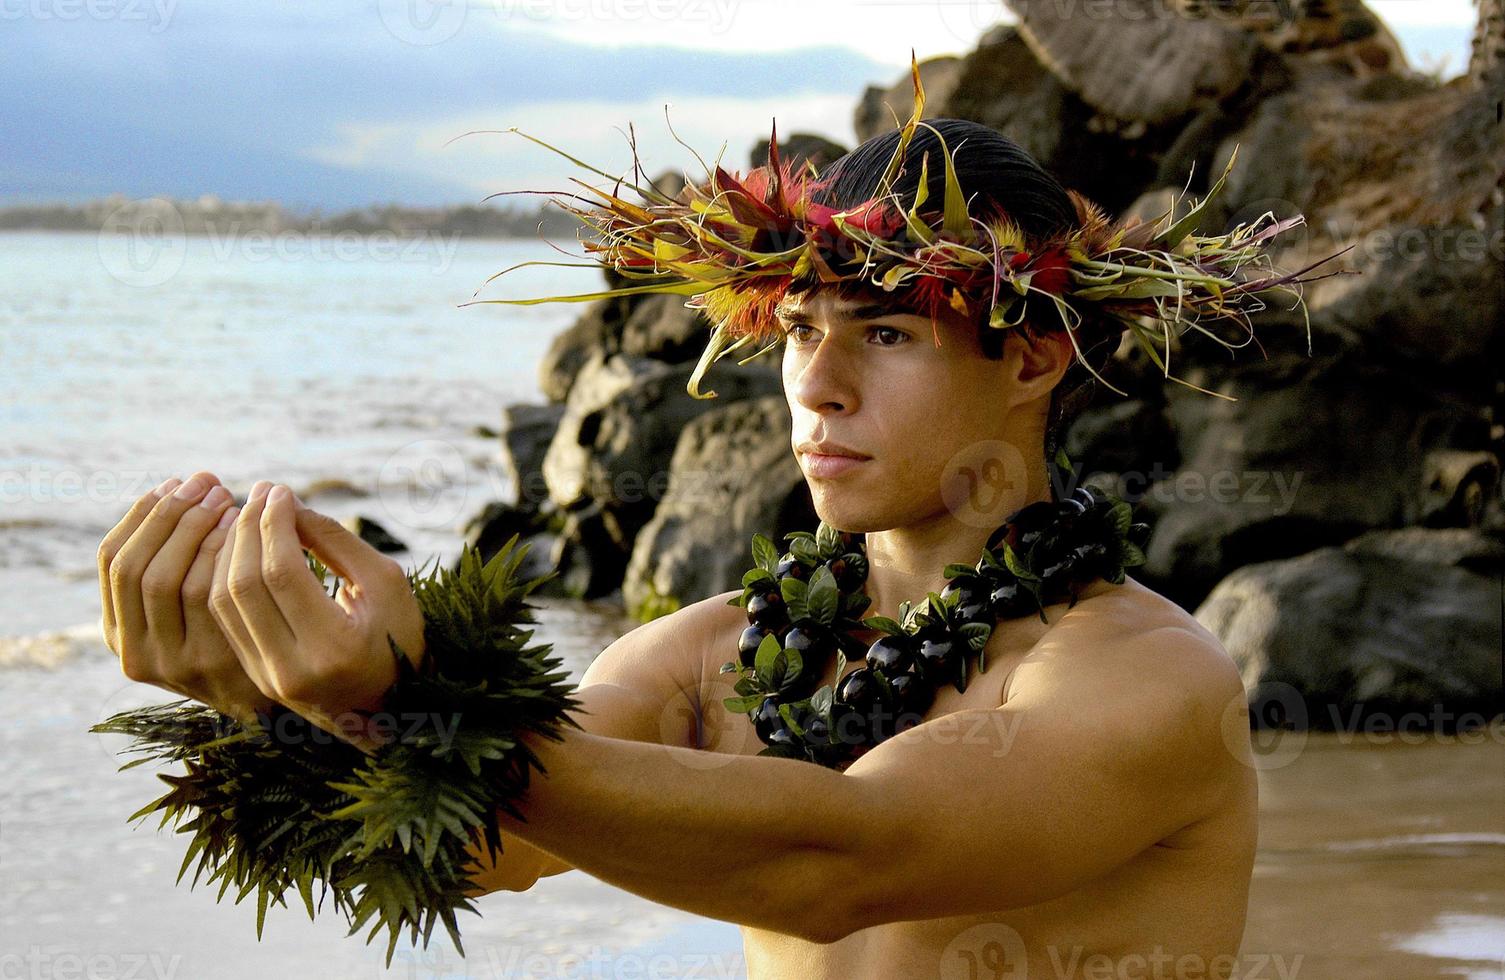 Male Hula Dancer poses on the beach with a giving gesture of the hula dance.. photo